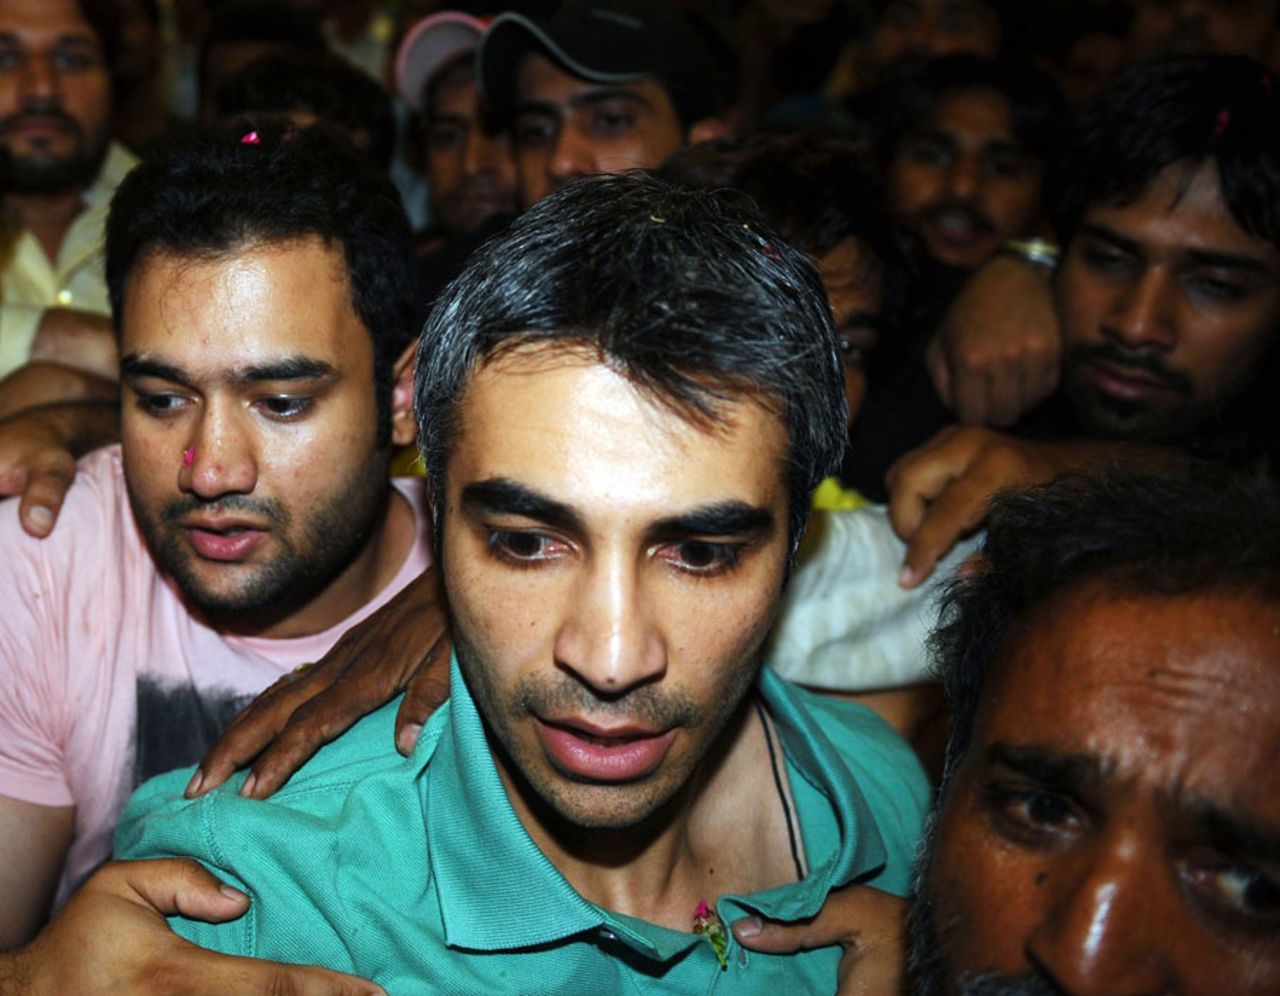 Salman Butt at Lahore airport after his release from jail, June 22, 2012